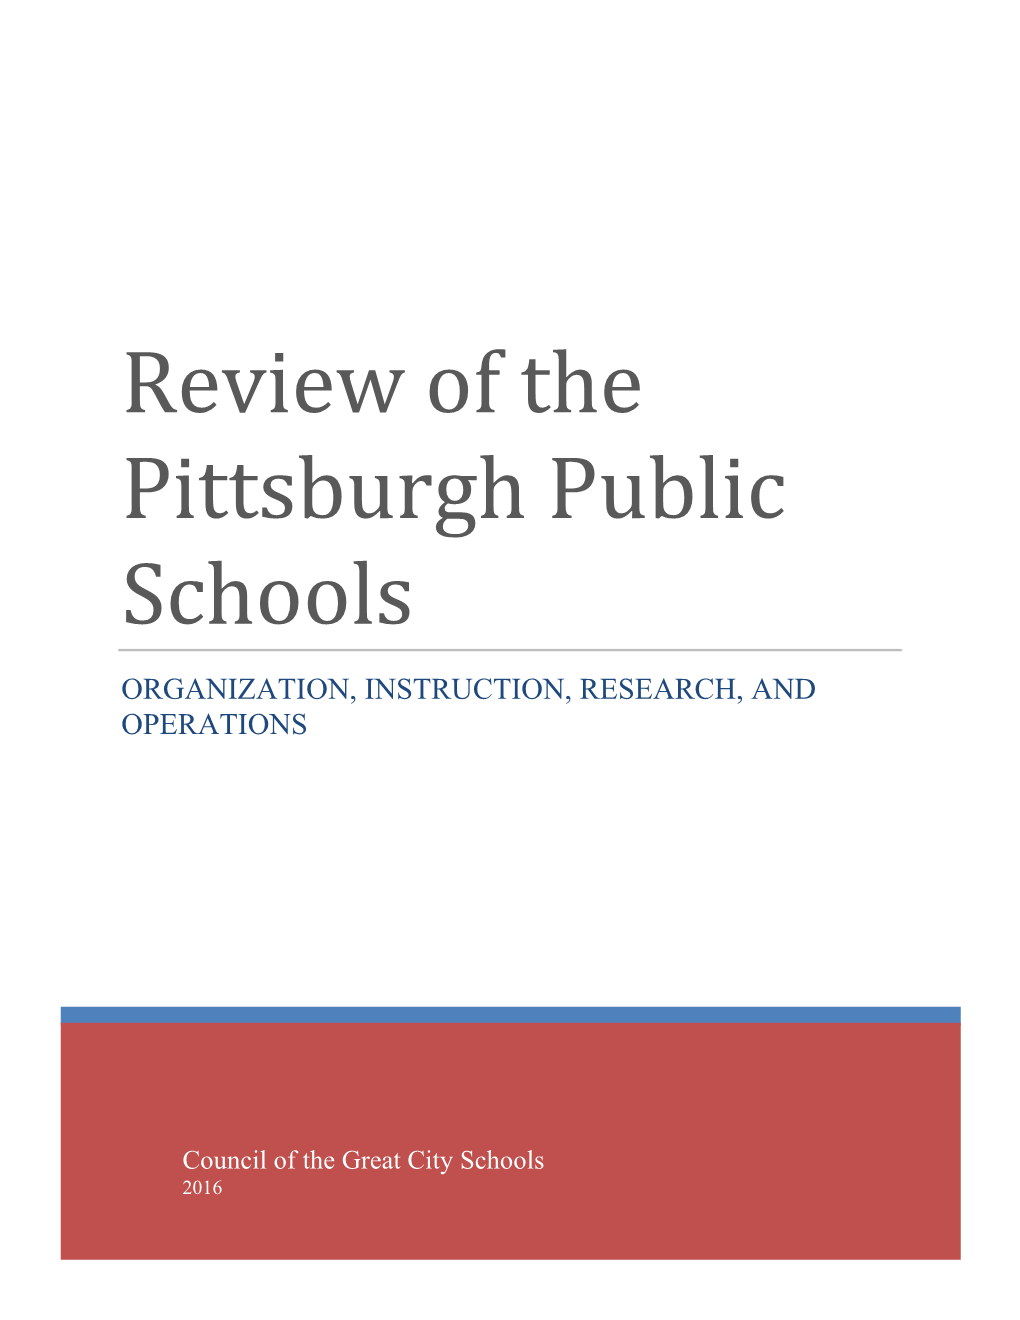 Review of the Pittsburgh Public Schools